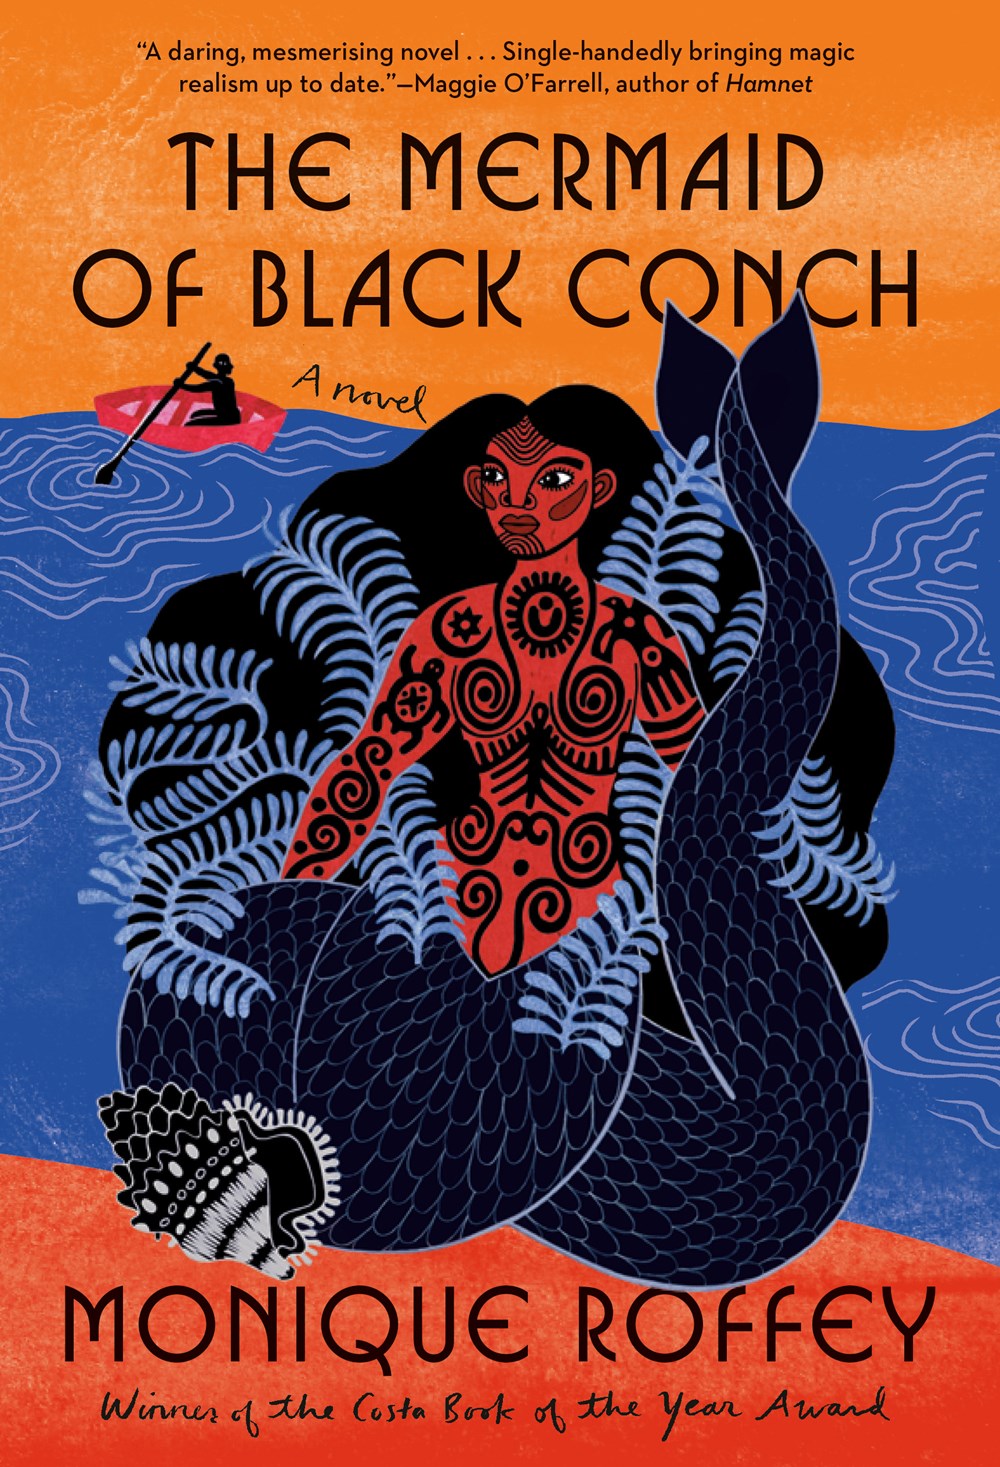 The Mermaid of Black Conch: A Novel by Monique Roffey